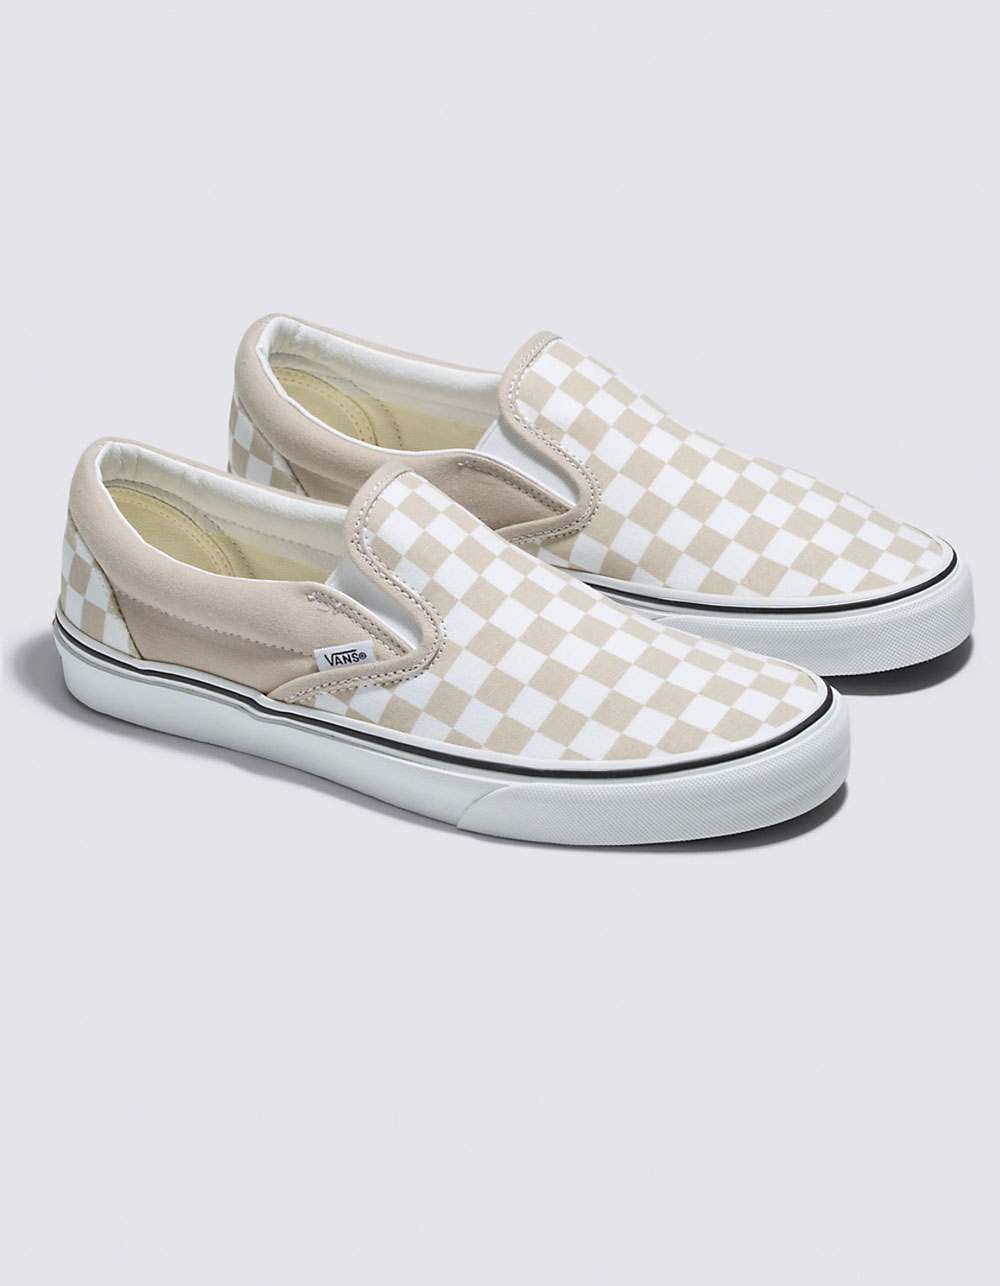 Women's Colorful Checkered Canvas Shoes, Trendy Low Top Slip On Skate  Shoes, Casual Flat Walking Shoes